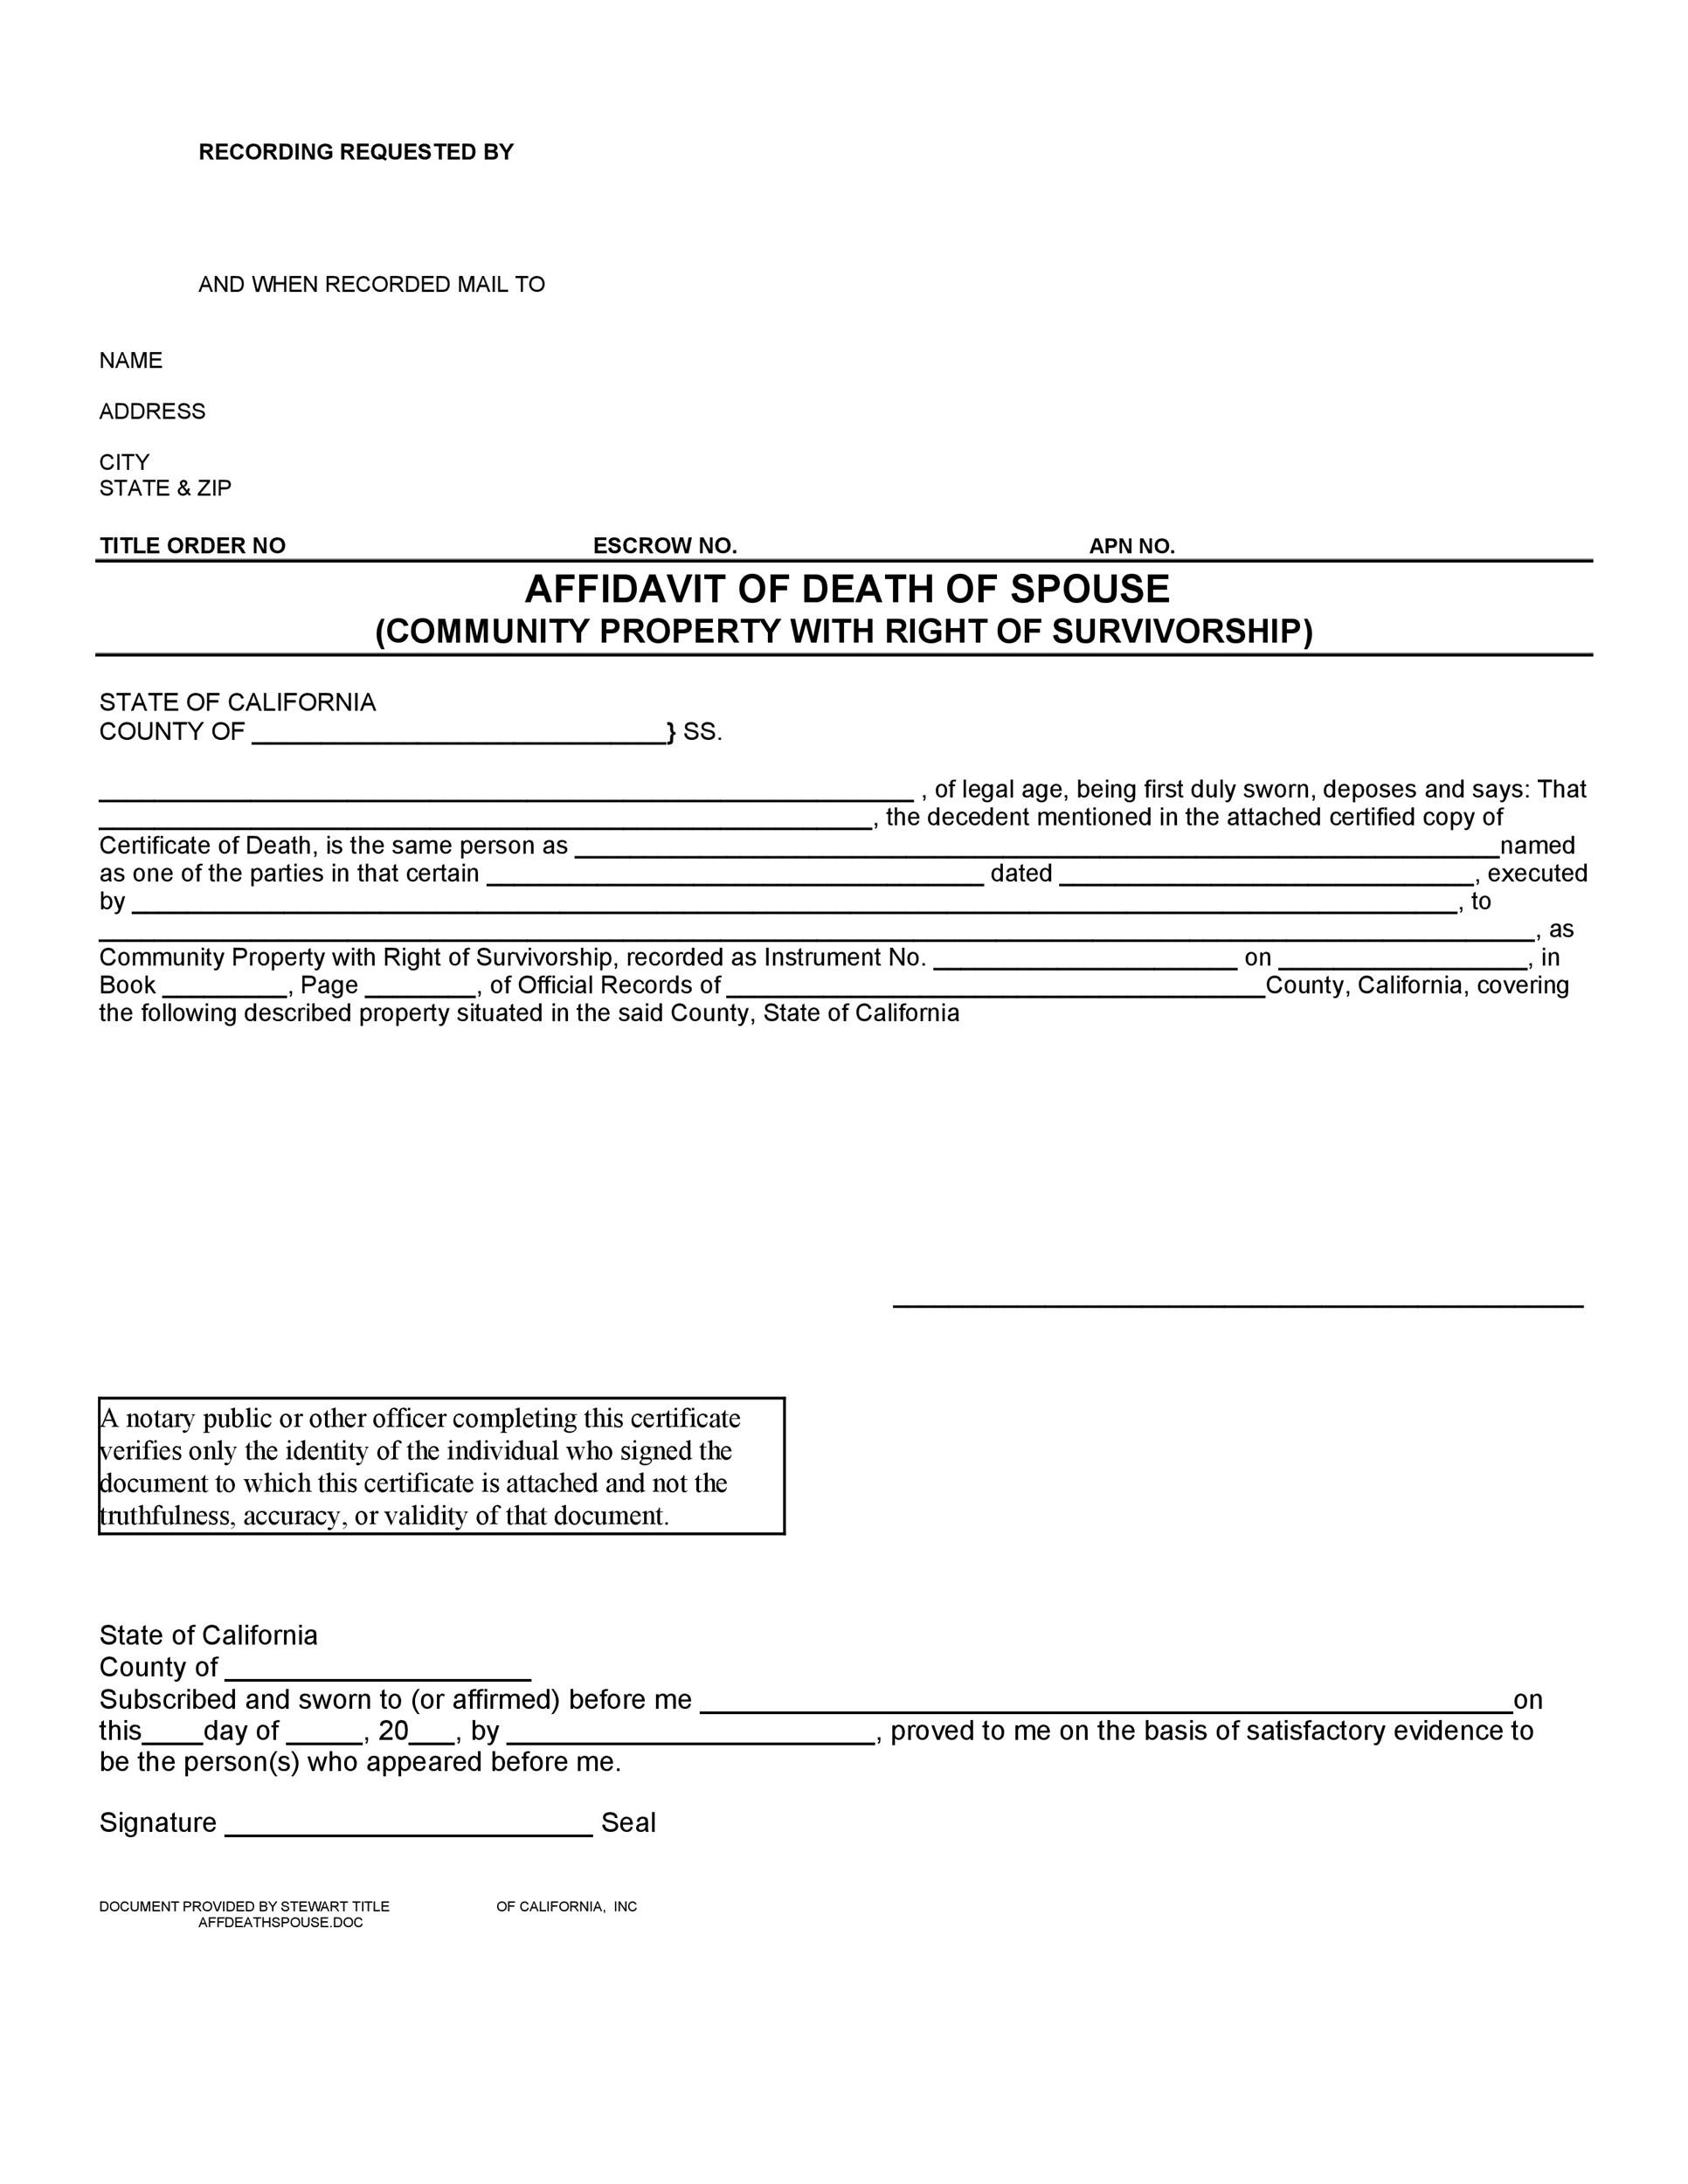 Affidavit Of Death Sample Form Fill Out And Sign Prin - vrogue.co